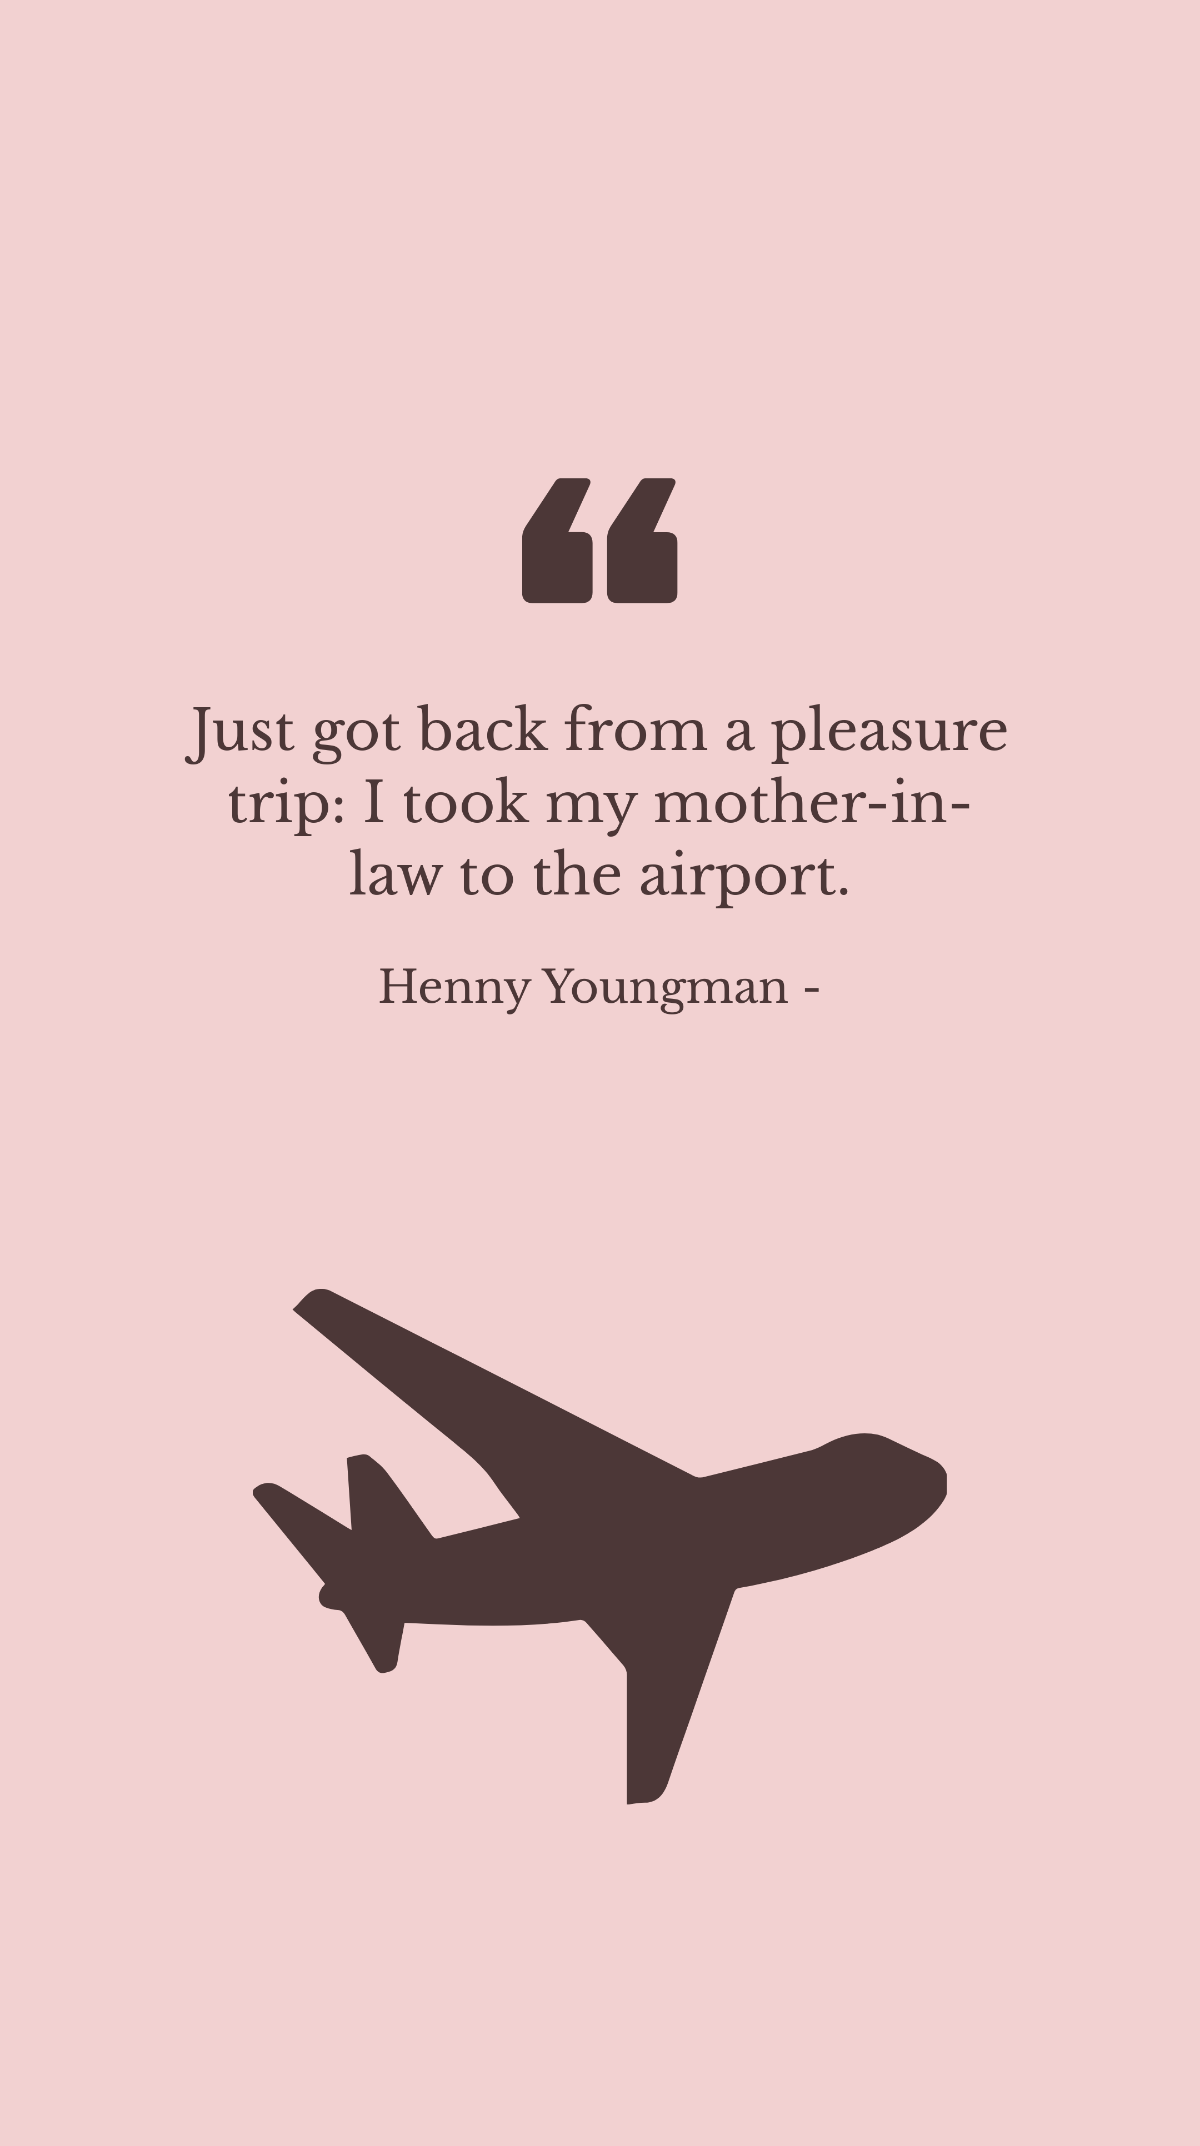 Free Henny Youngman - Just got back from a pleasure trip: I took my mother-in-law to the airport. Template